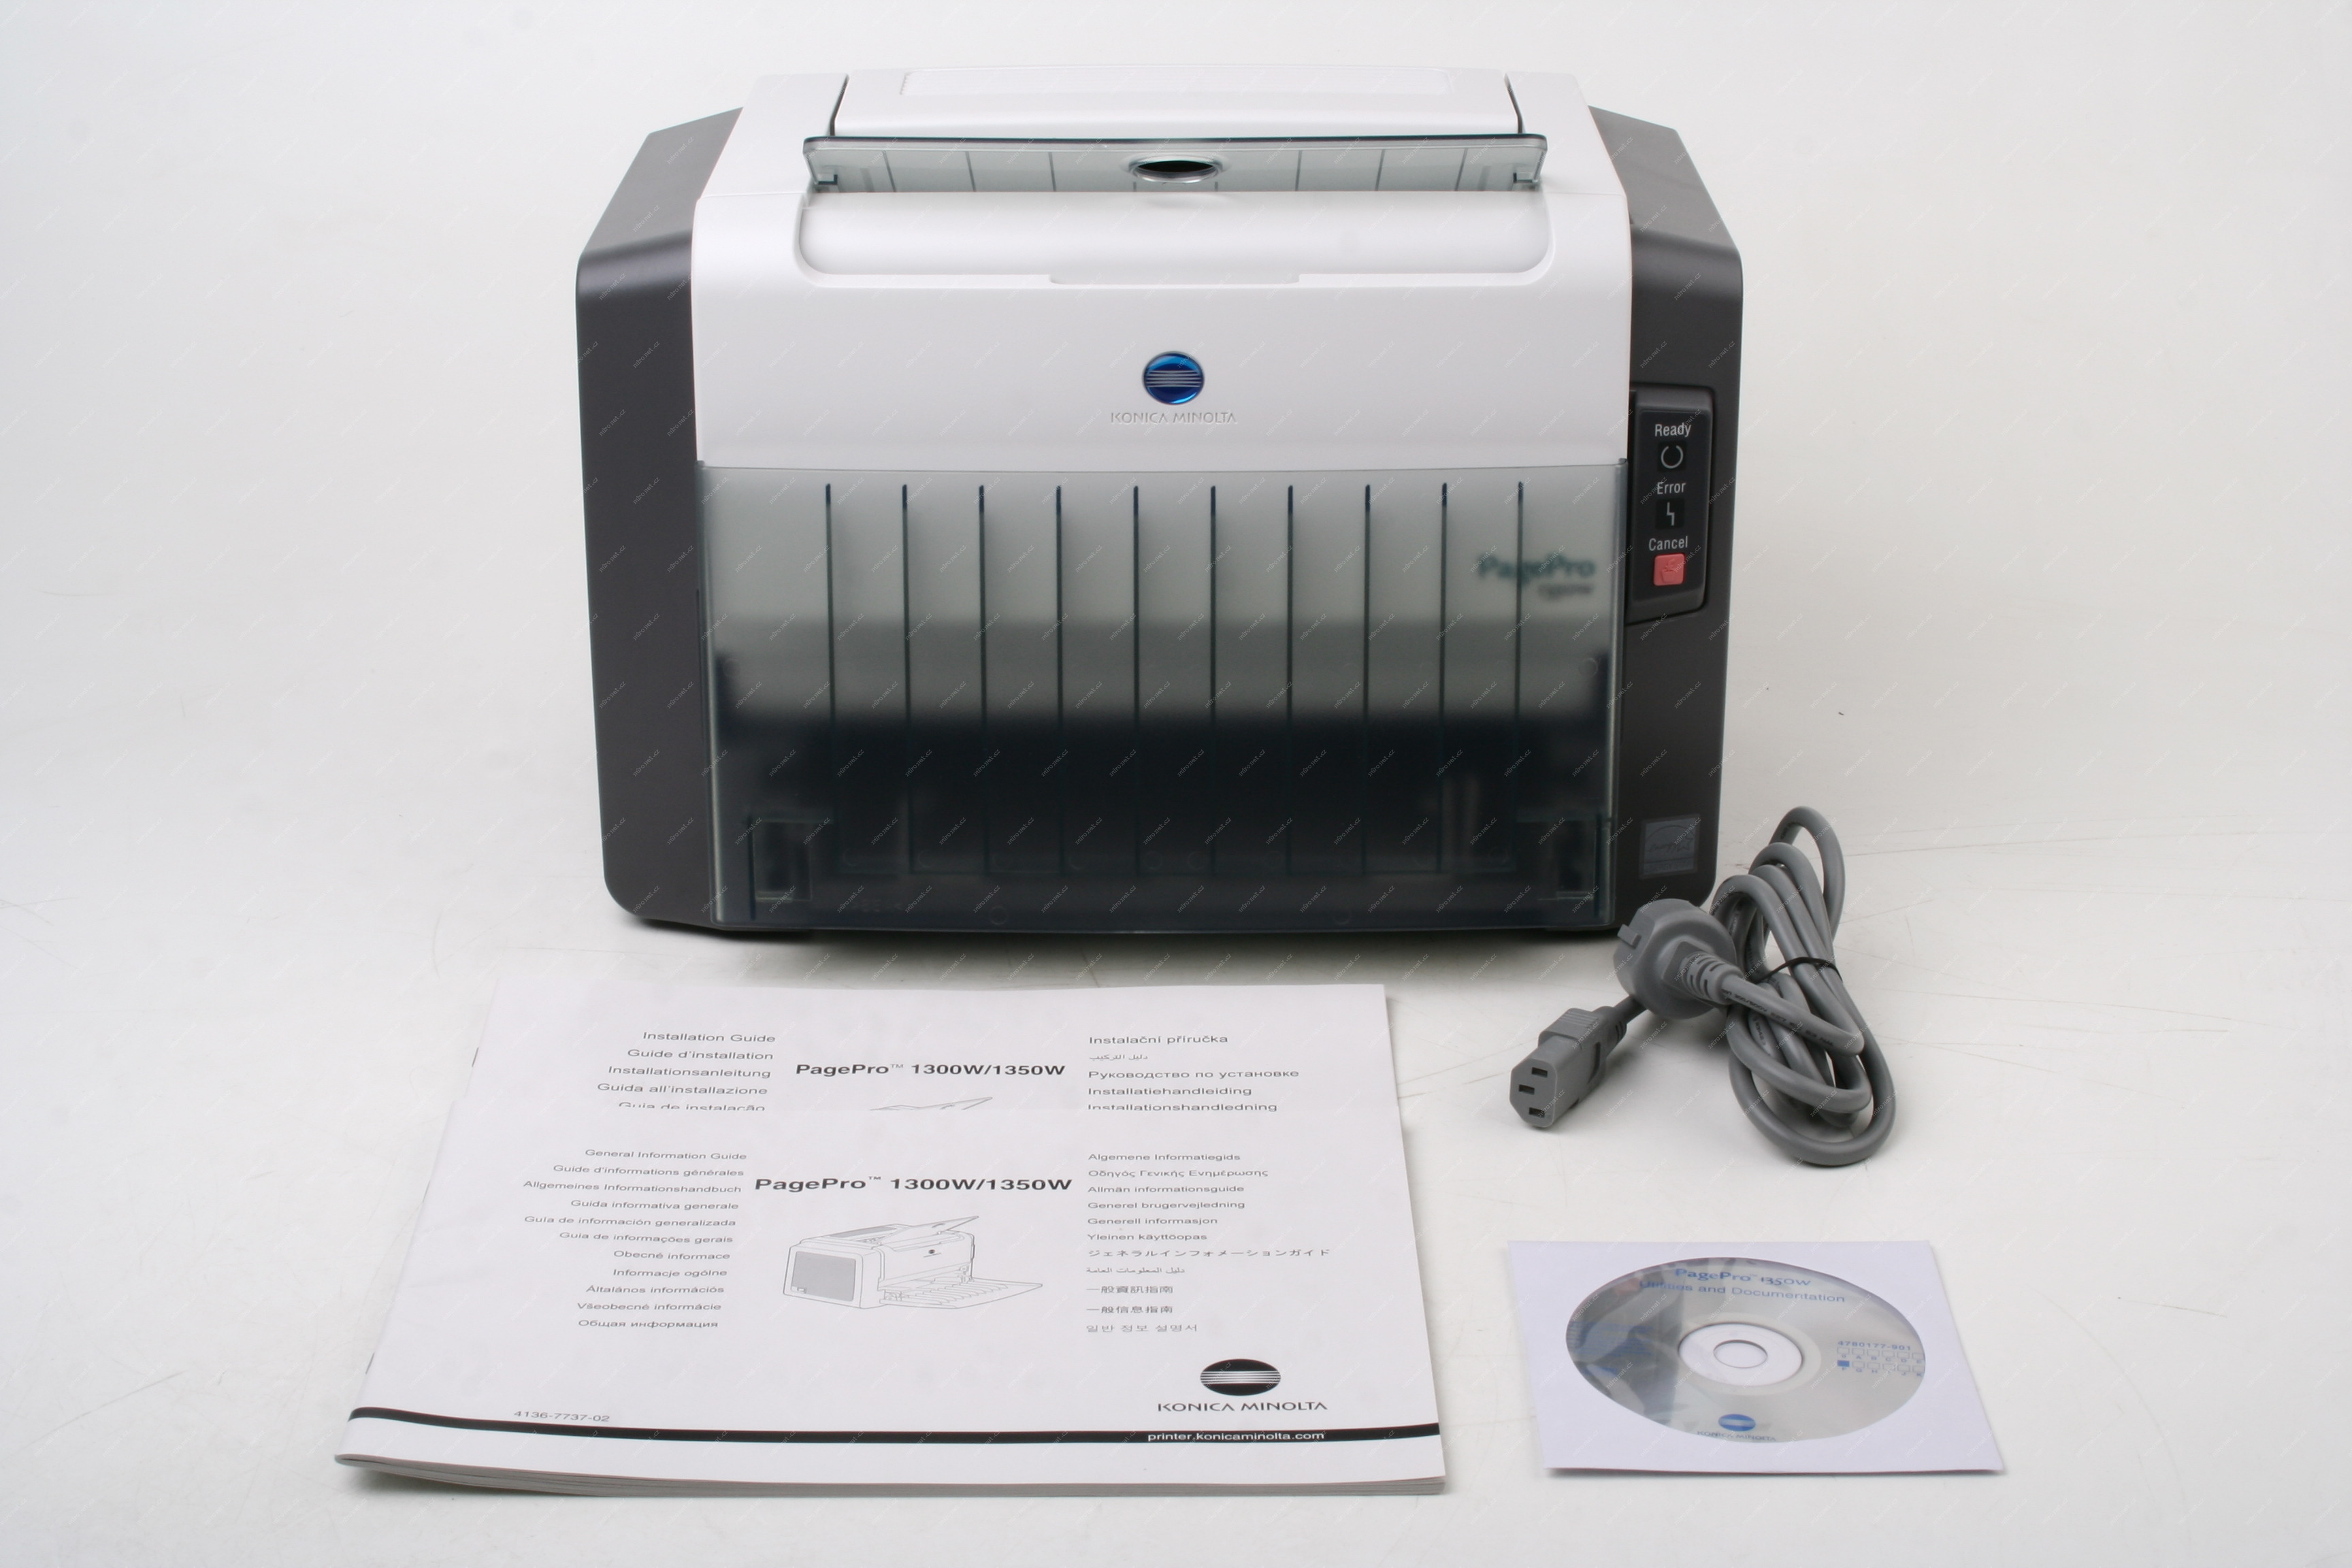 Minolta 1350W Driver - Konica Minolta Pagepro 1350W Ovladače - KONICA MINOLTA ... - This color multifunction printer offers great function of fax, scanner and print in wide format.